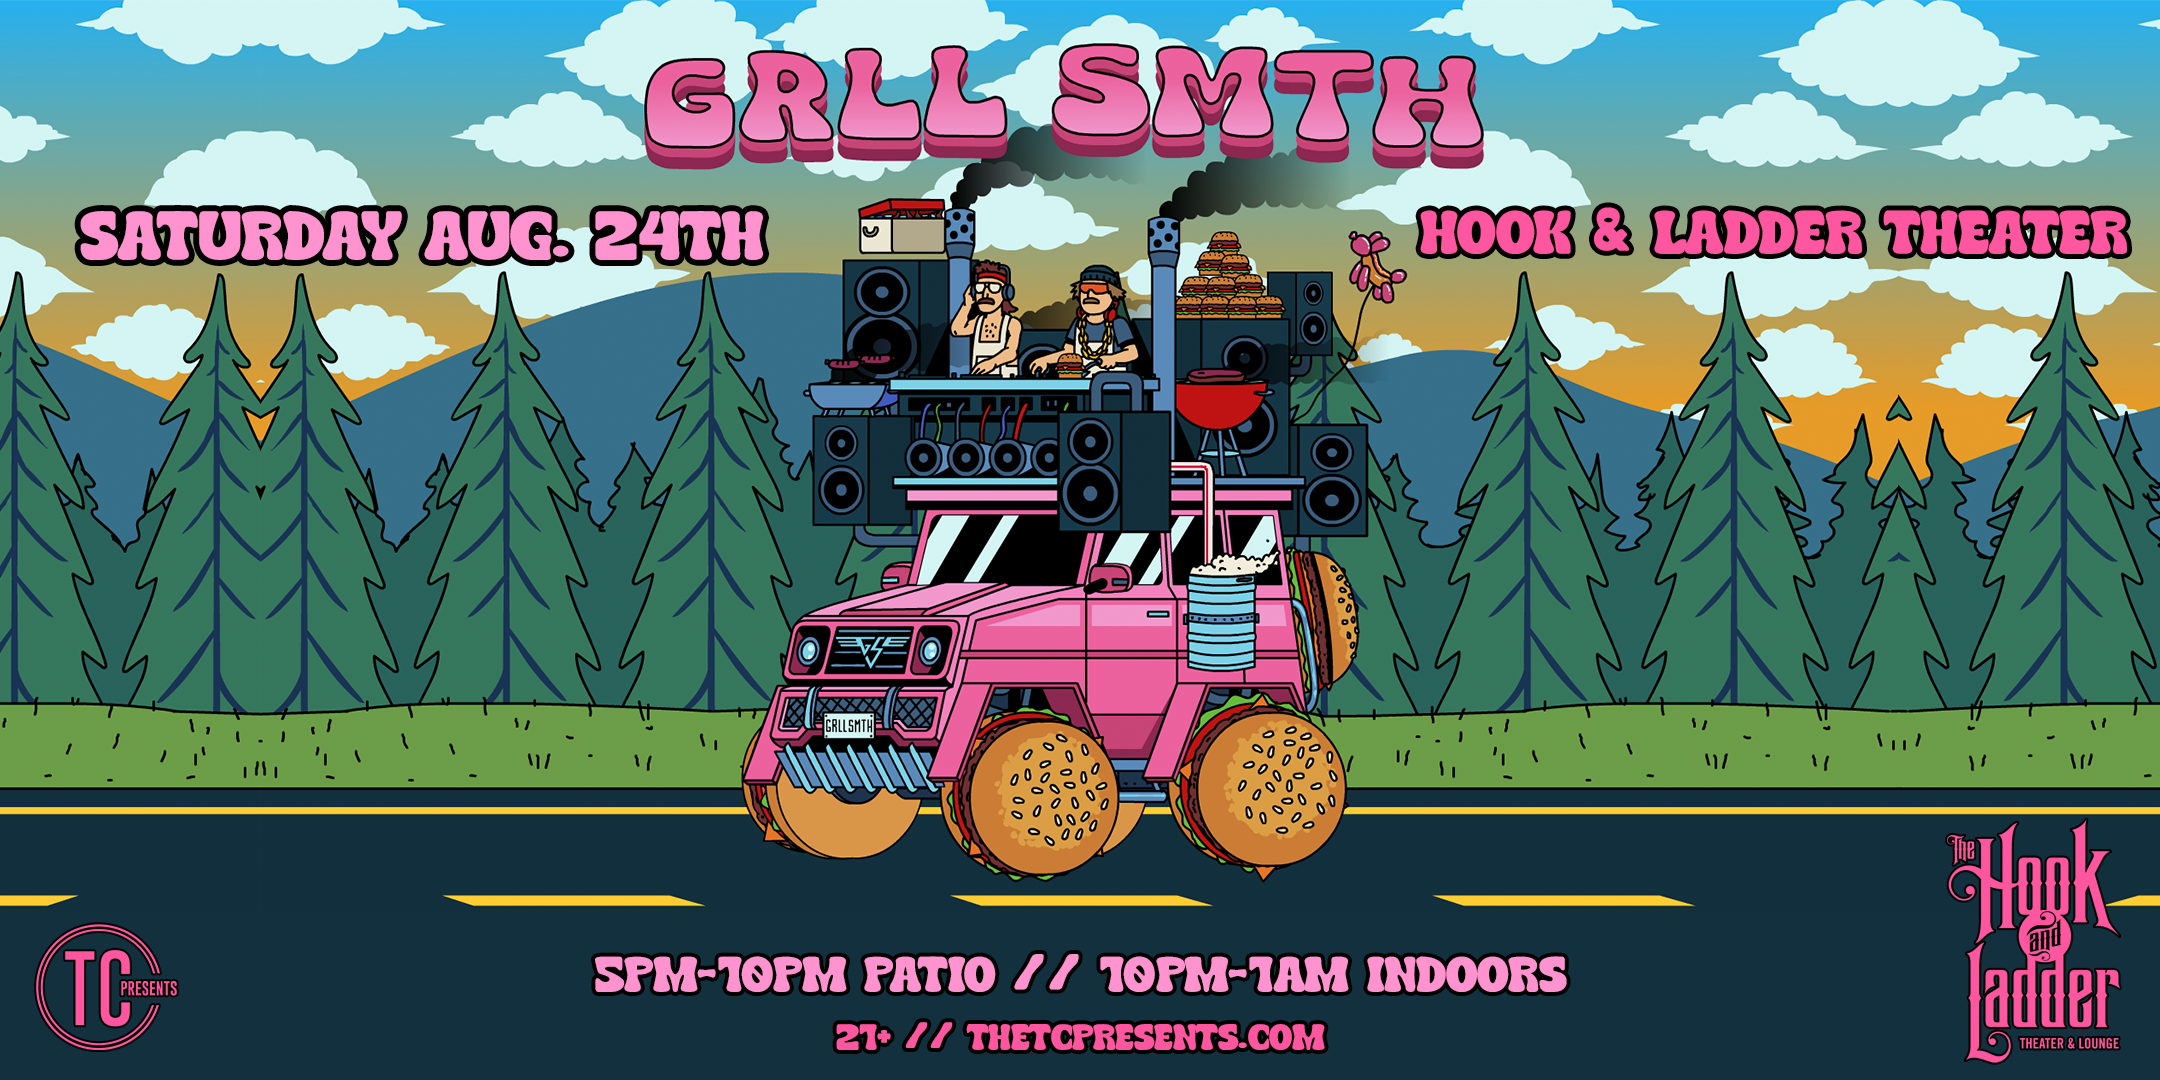 kLL sMTH & Friends + a special gRLL sMTH Cookout Saturday, August 24, 2024 The Hook and Ladder Theater Cookout: 5:00PM - 10:00PM - $40 ADV/ $45 DOS Night Party: Music 10:00PM - $30 ADV / $35 DOS Full Event: 5:00PM - 1:00AM - $60 ADV / $70 DOS